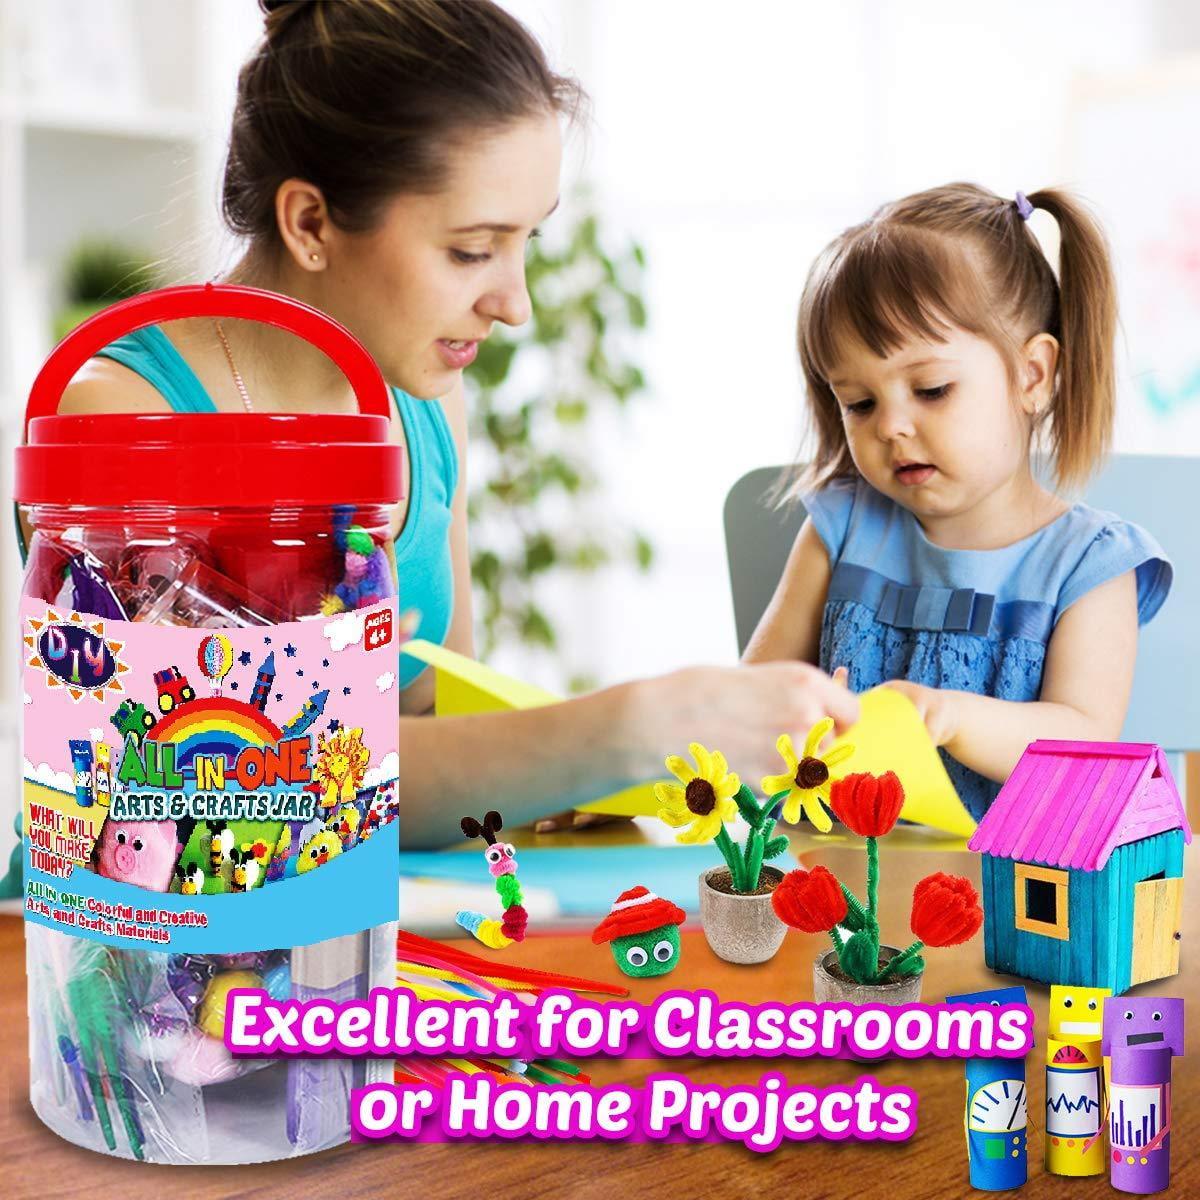  All in One Arts and Crafts for Kids, Art Kit for